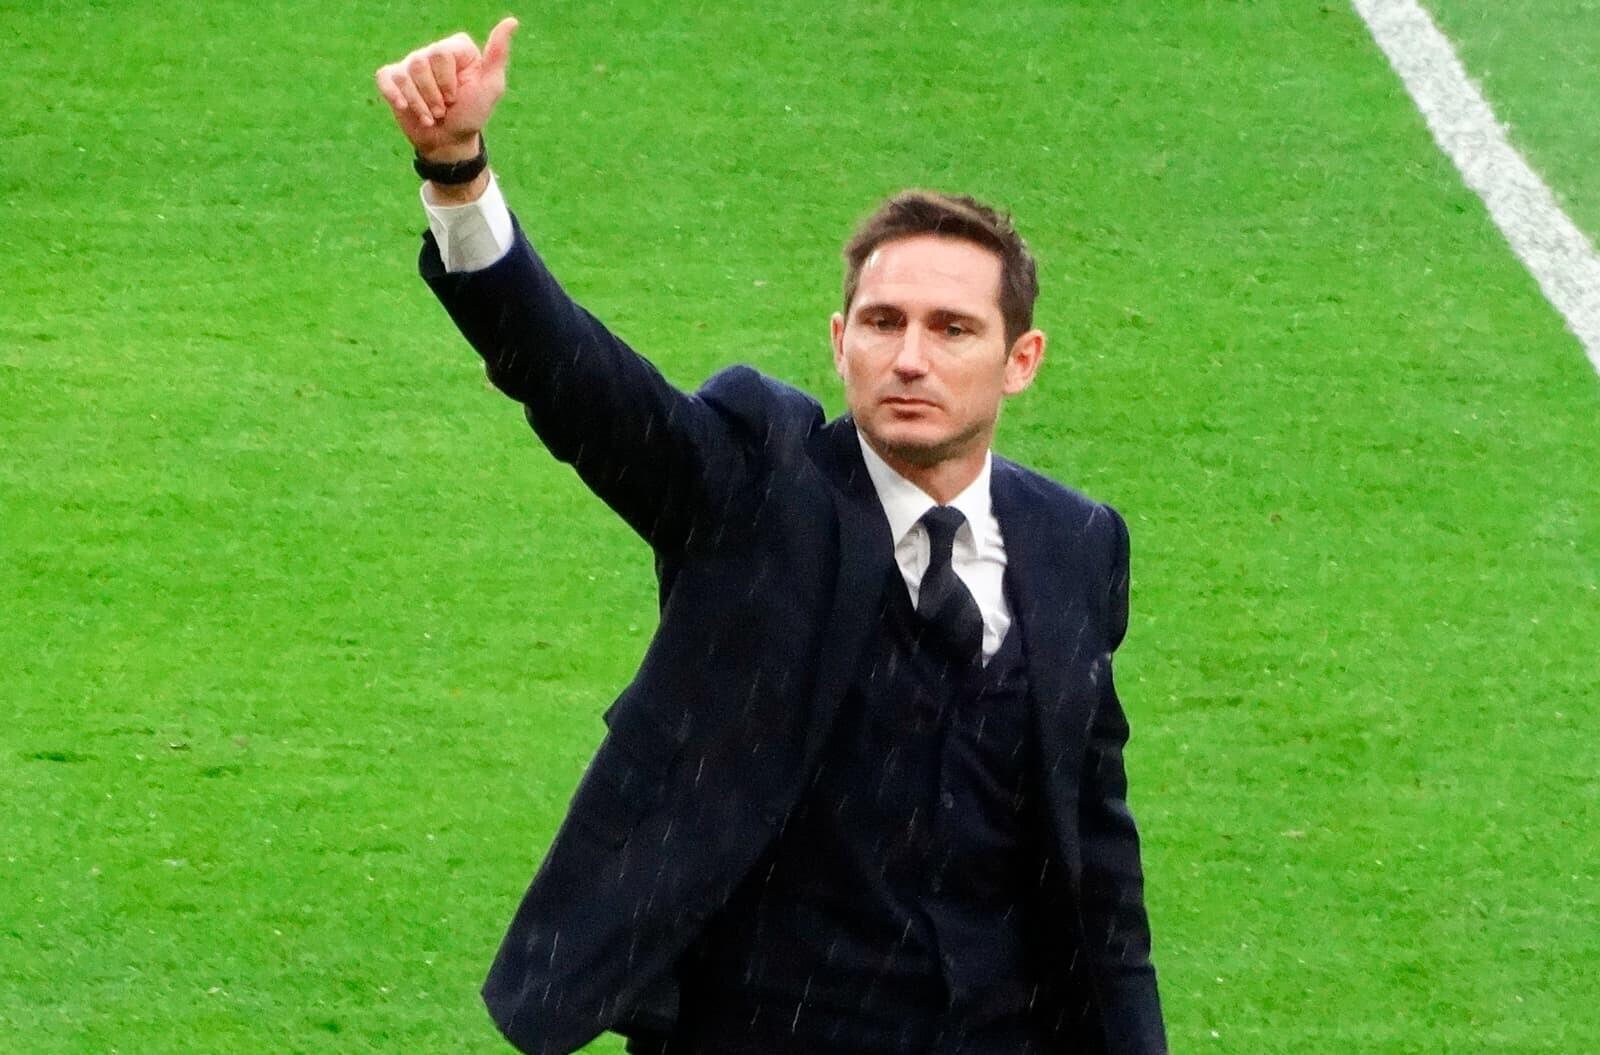 Frank Lampard in a suit giving the thumbs up to the crowd